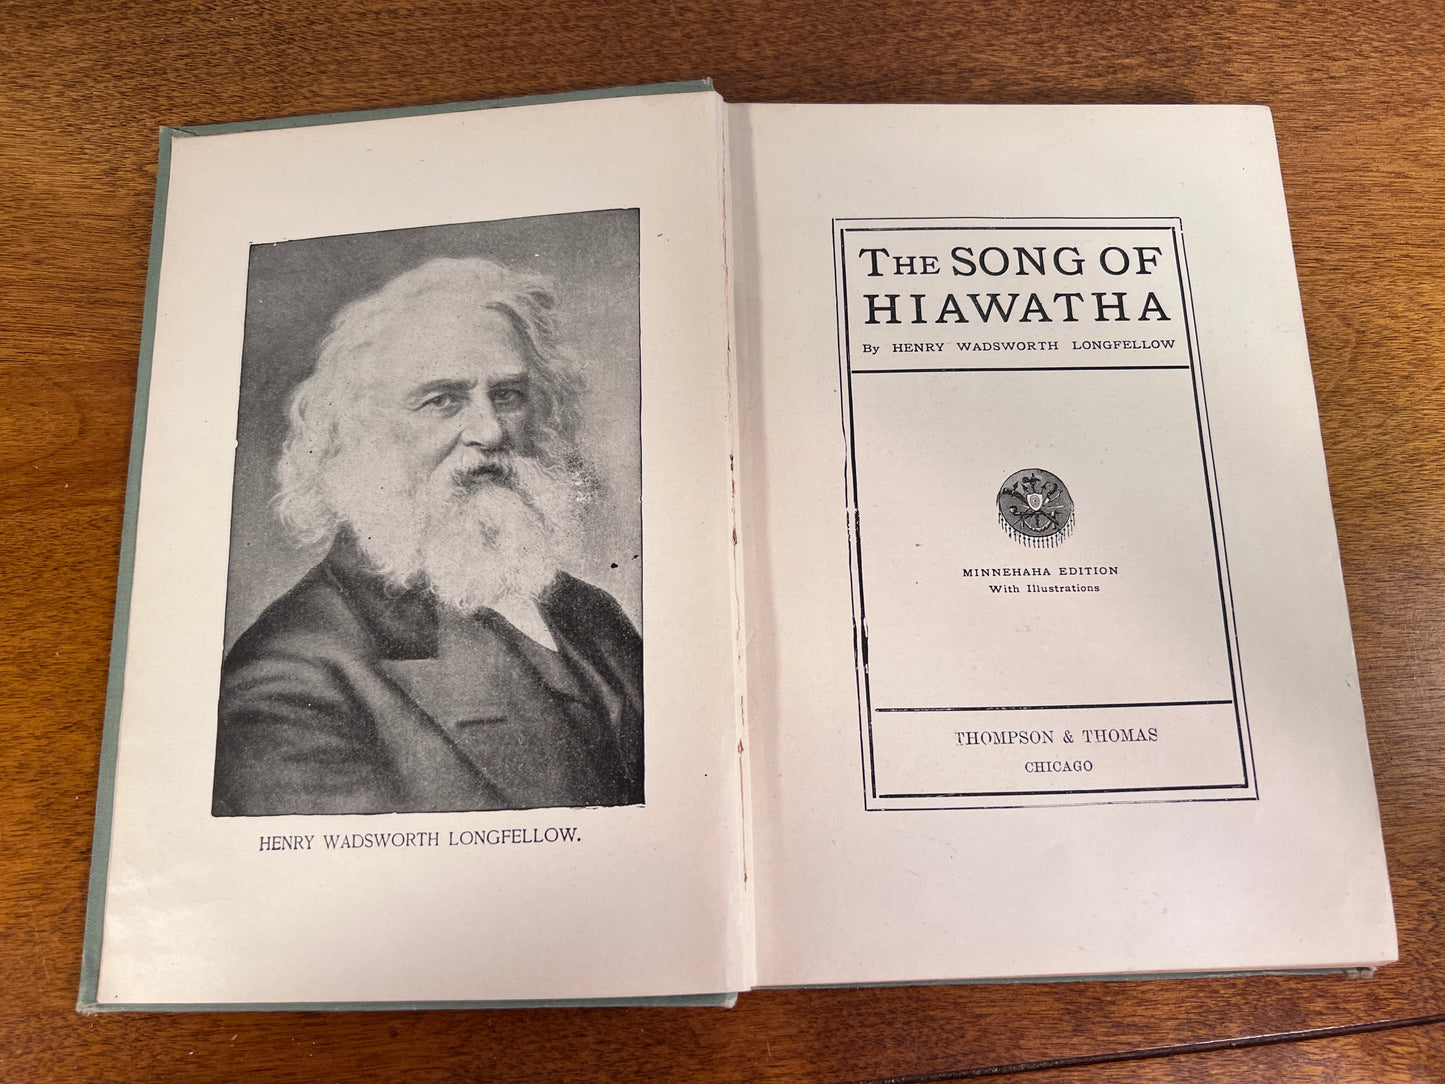 The Song of Hiawatha by Henry Wadsworth Longfellow, 1898